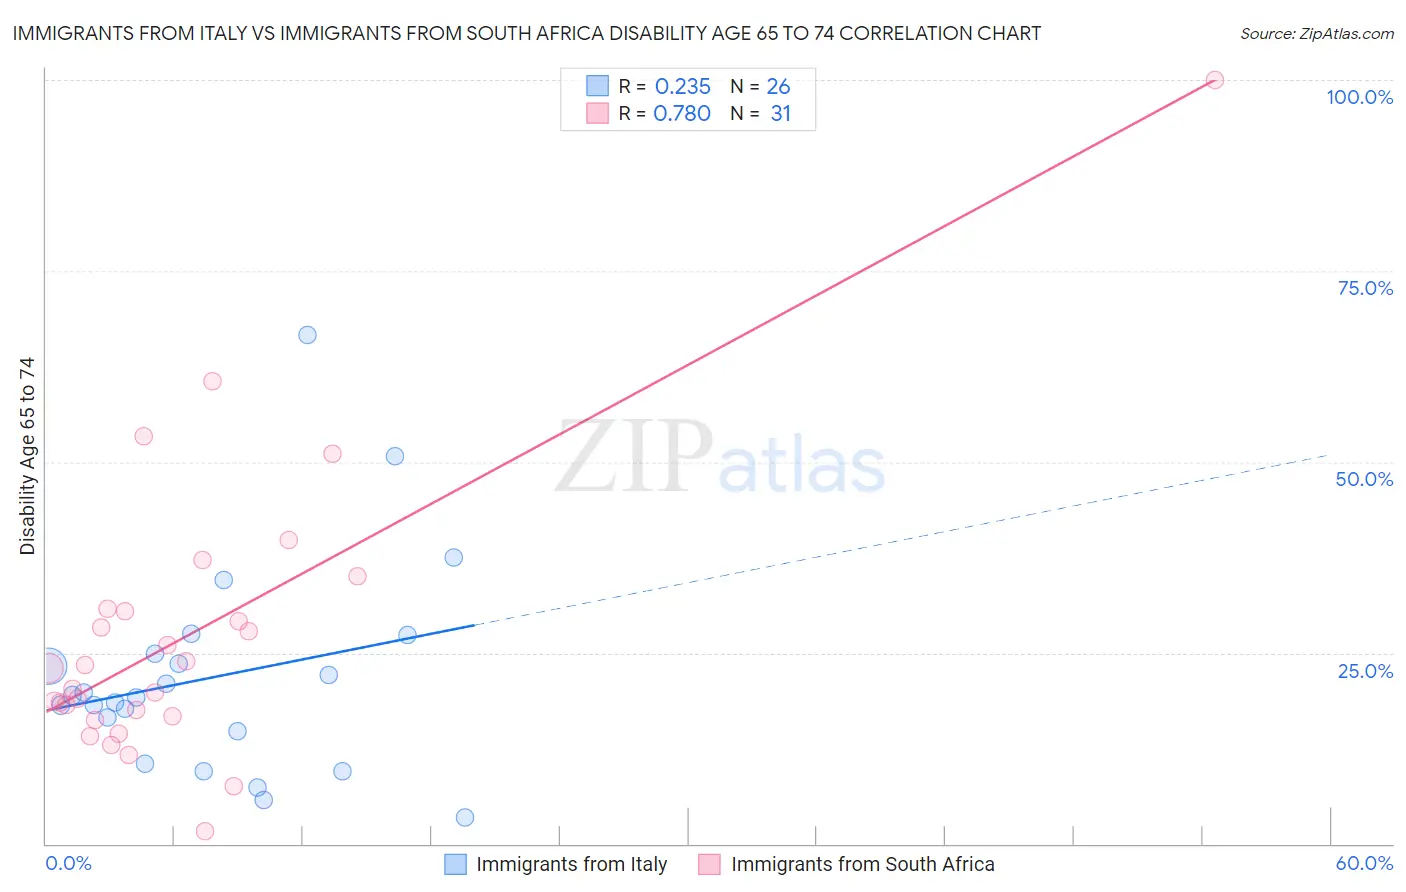 Immigrants from Italy vs Immigrants from South Africa Disability Age 65 to 74